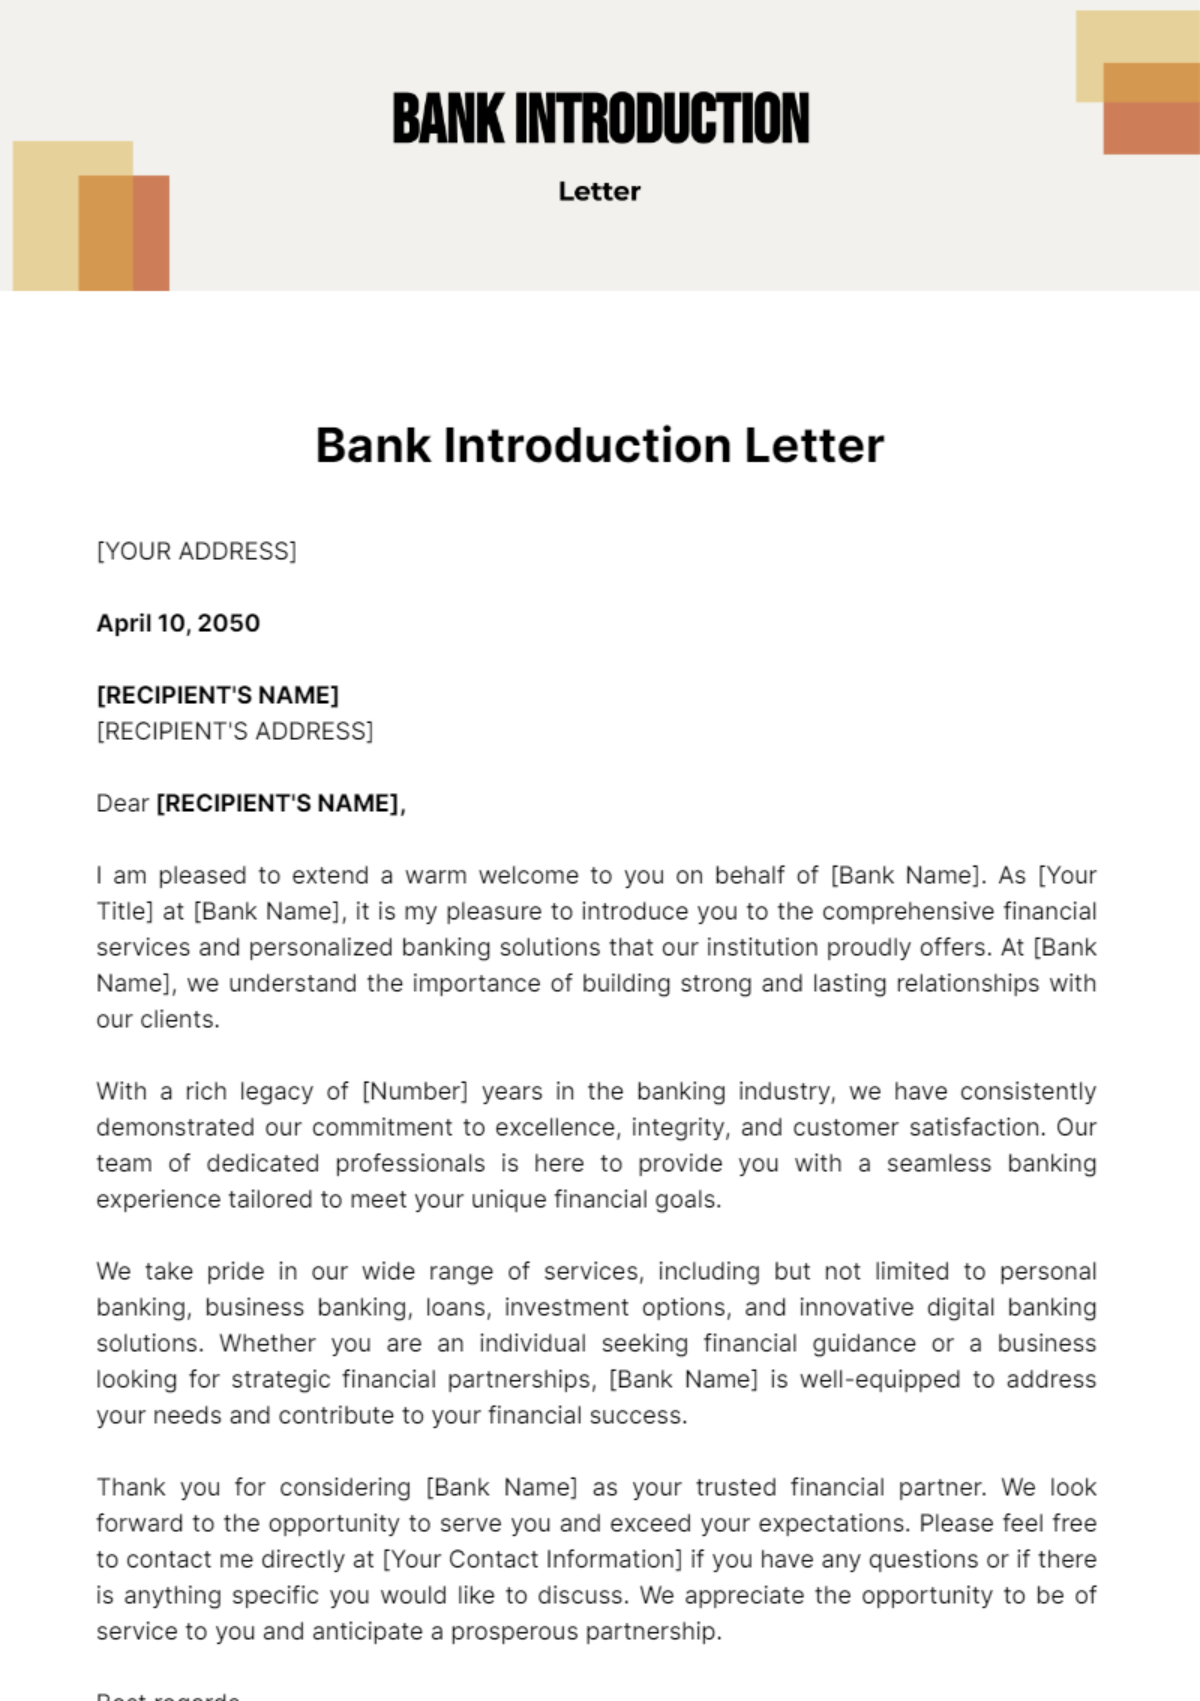 Free Bank Introduction Letter Template